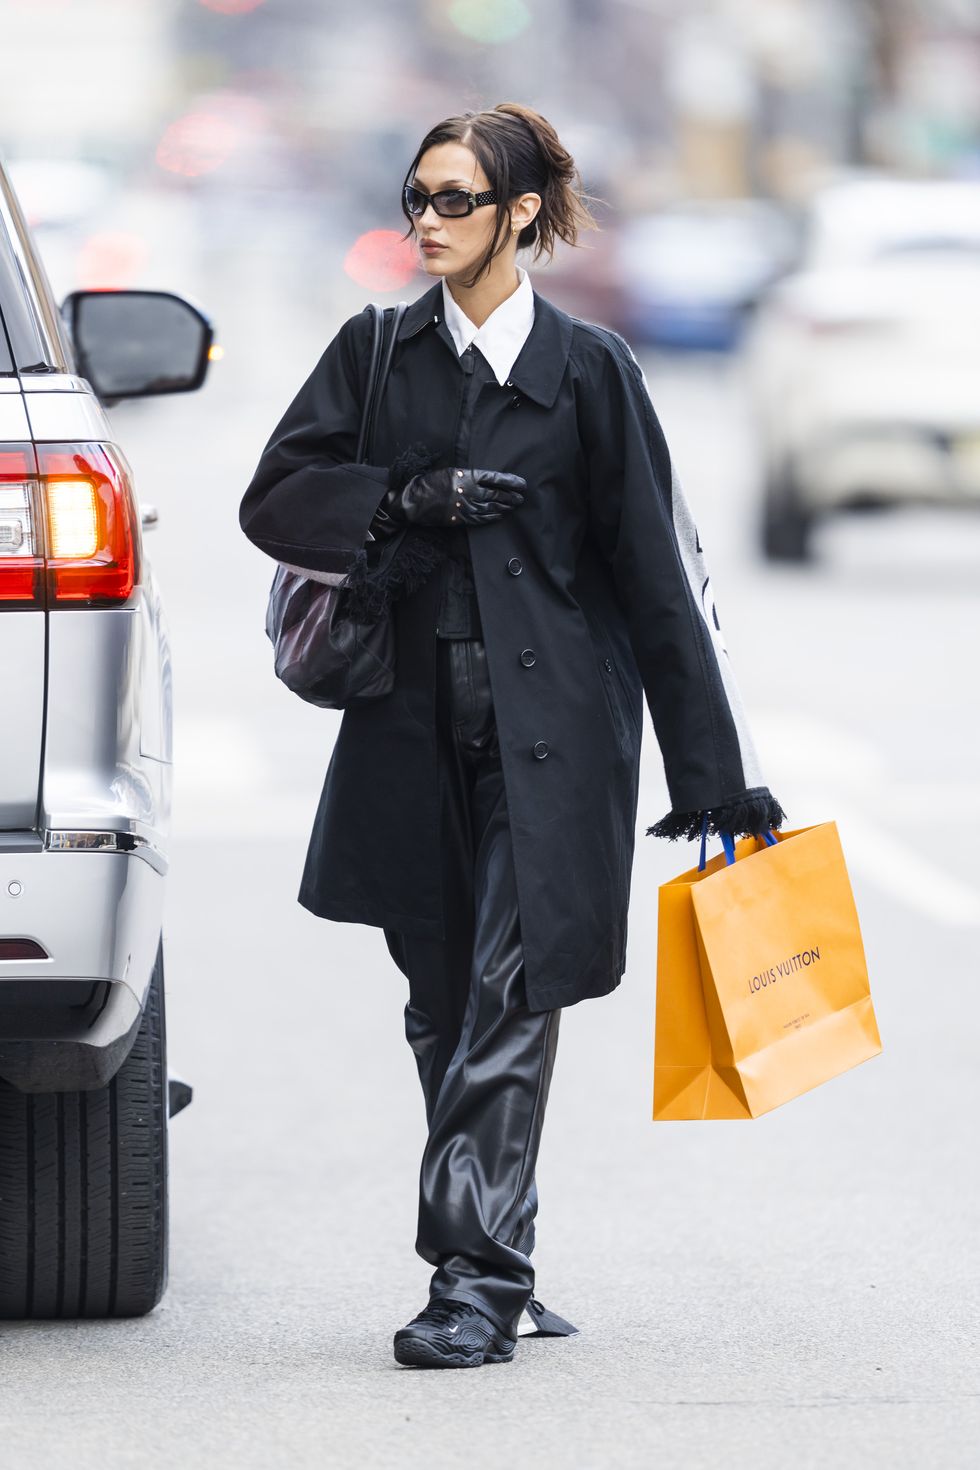 Bella Hadid Style - Shops at Louis Vuitton in NYC 01/09/2019